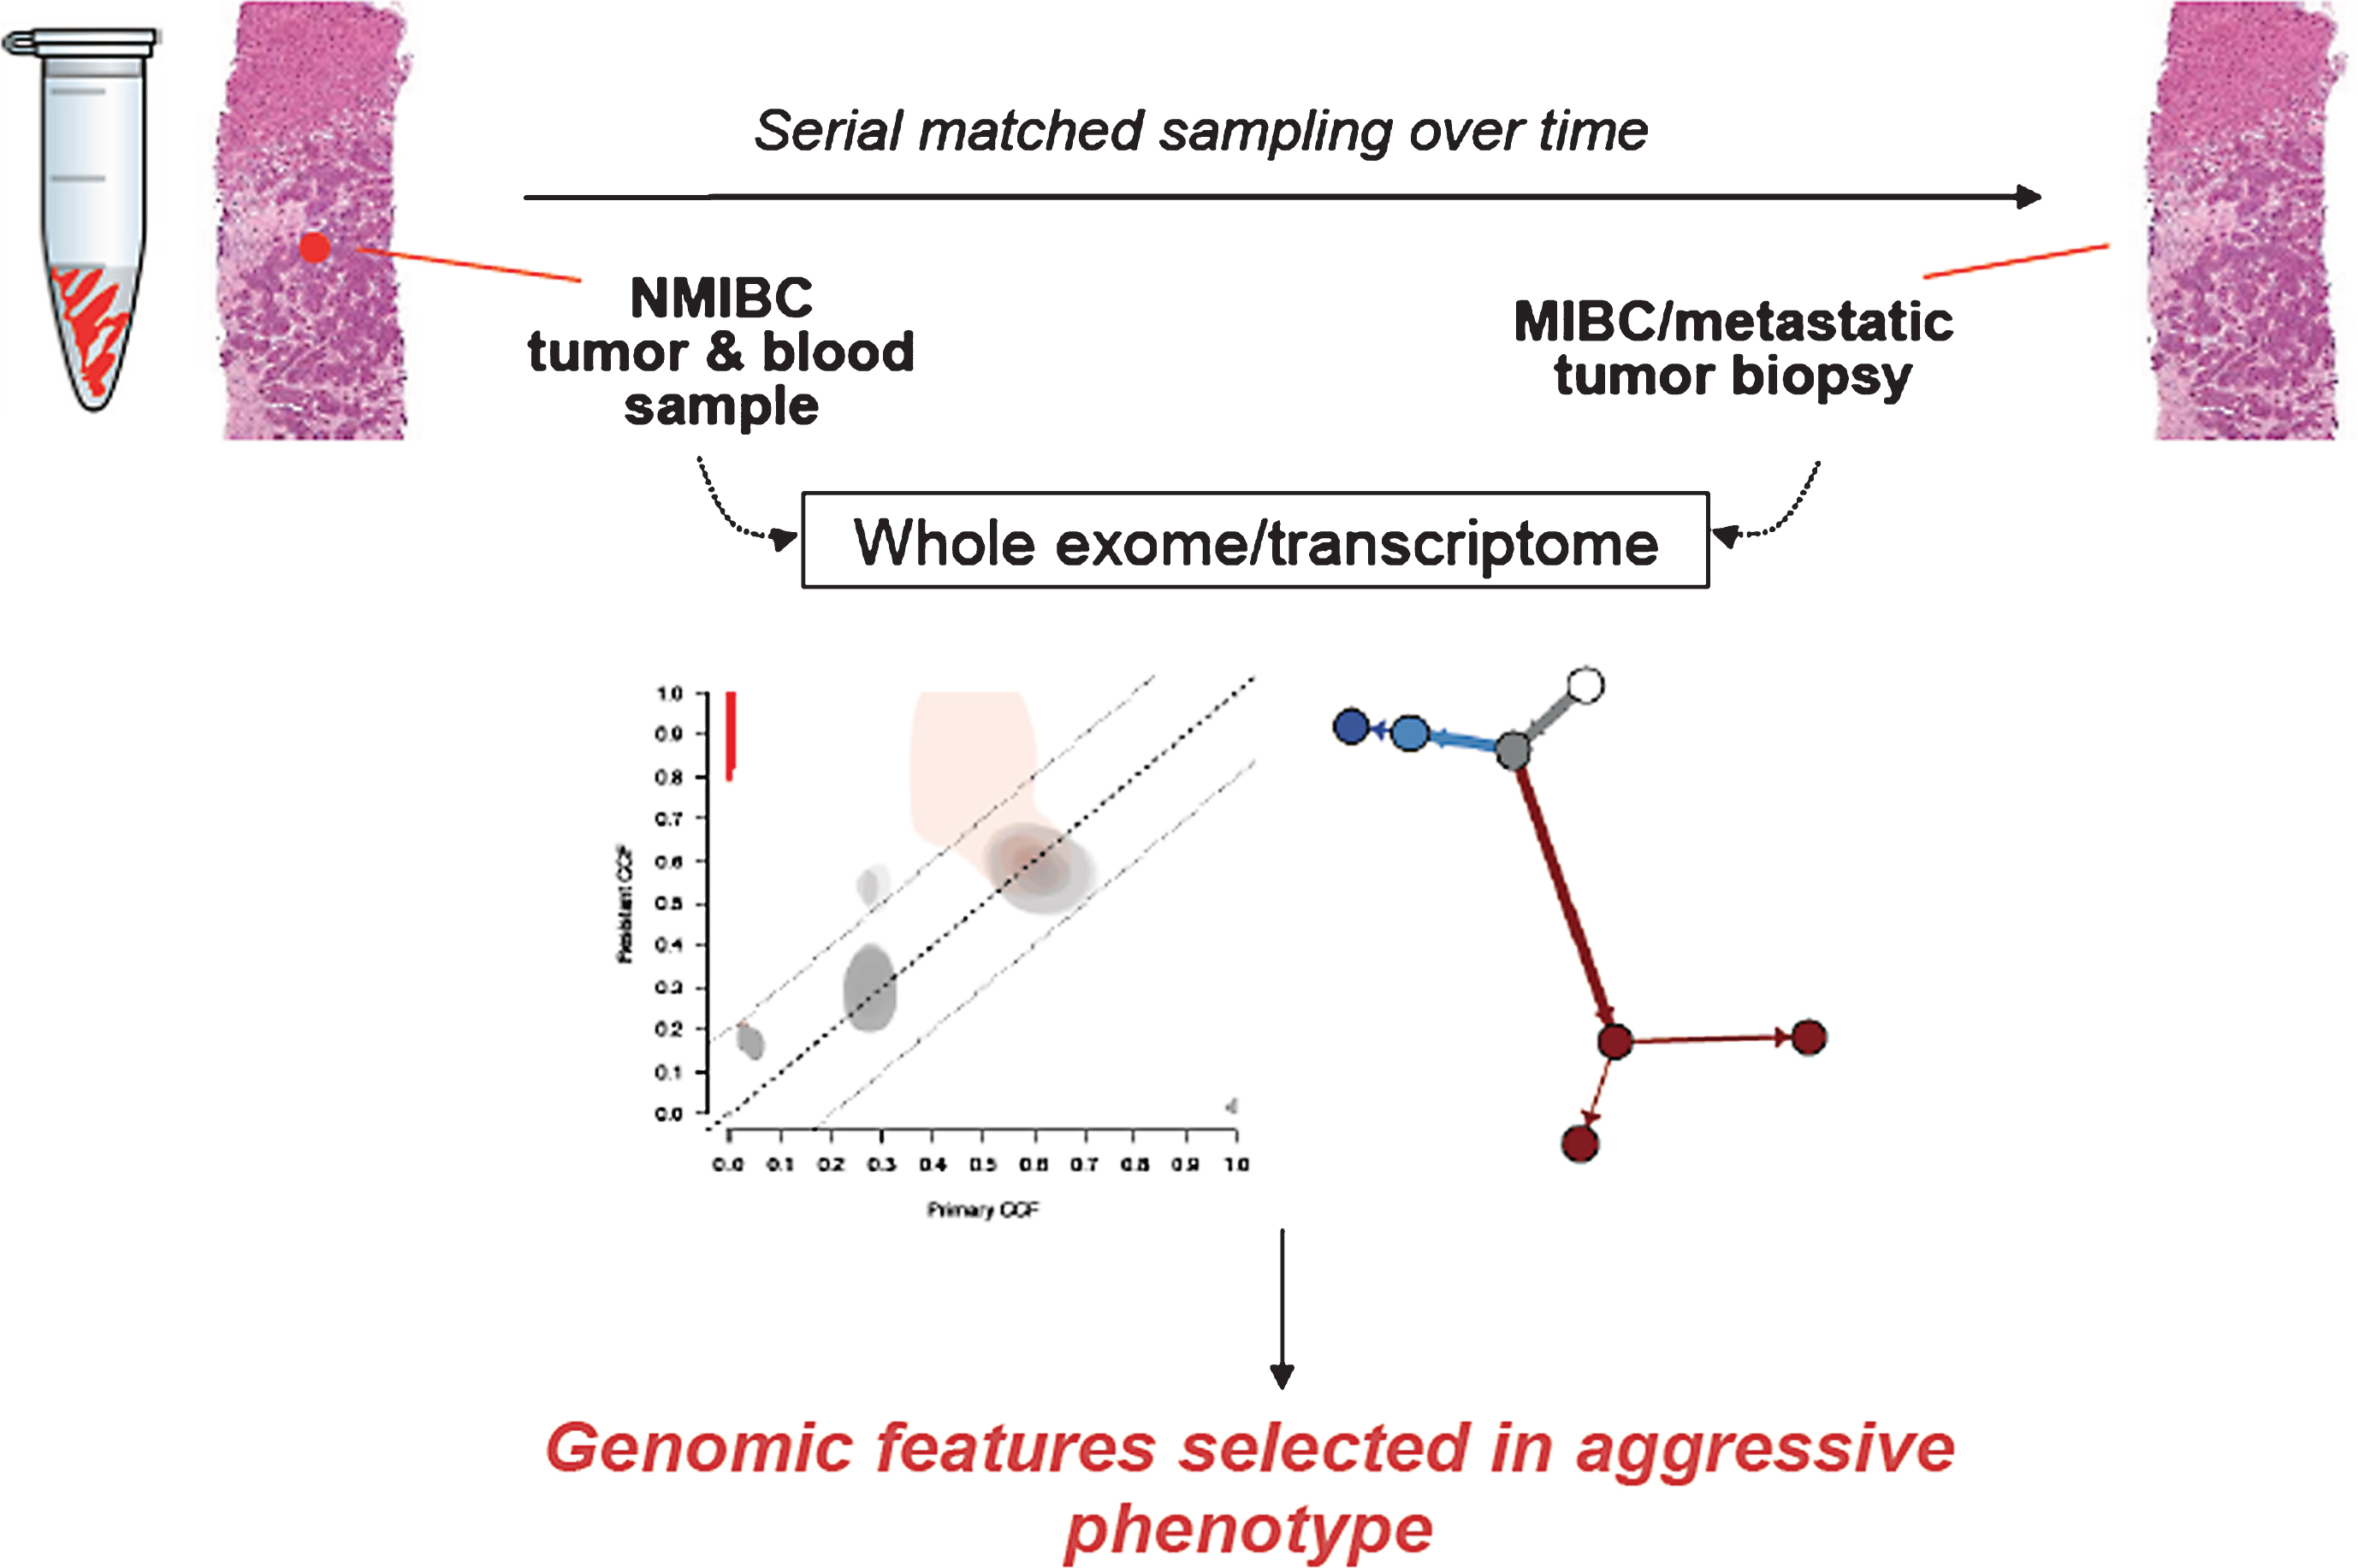 Schematic for longitudinal tumor sampling of NMIBC to MIBC progression. This approach may inform genomic features of high risk disease and identify new therapeutic targets.